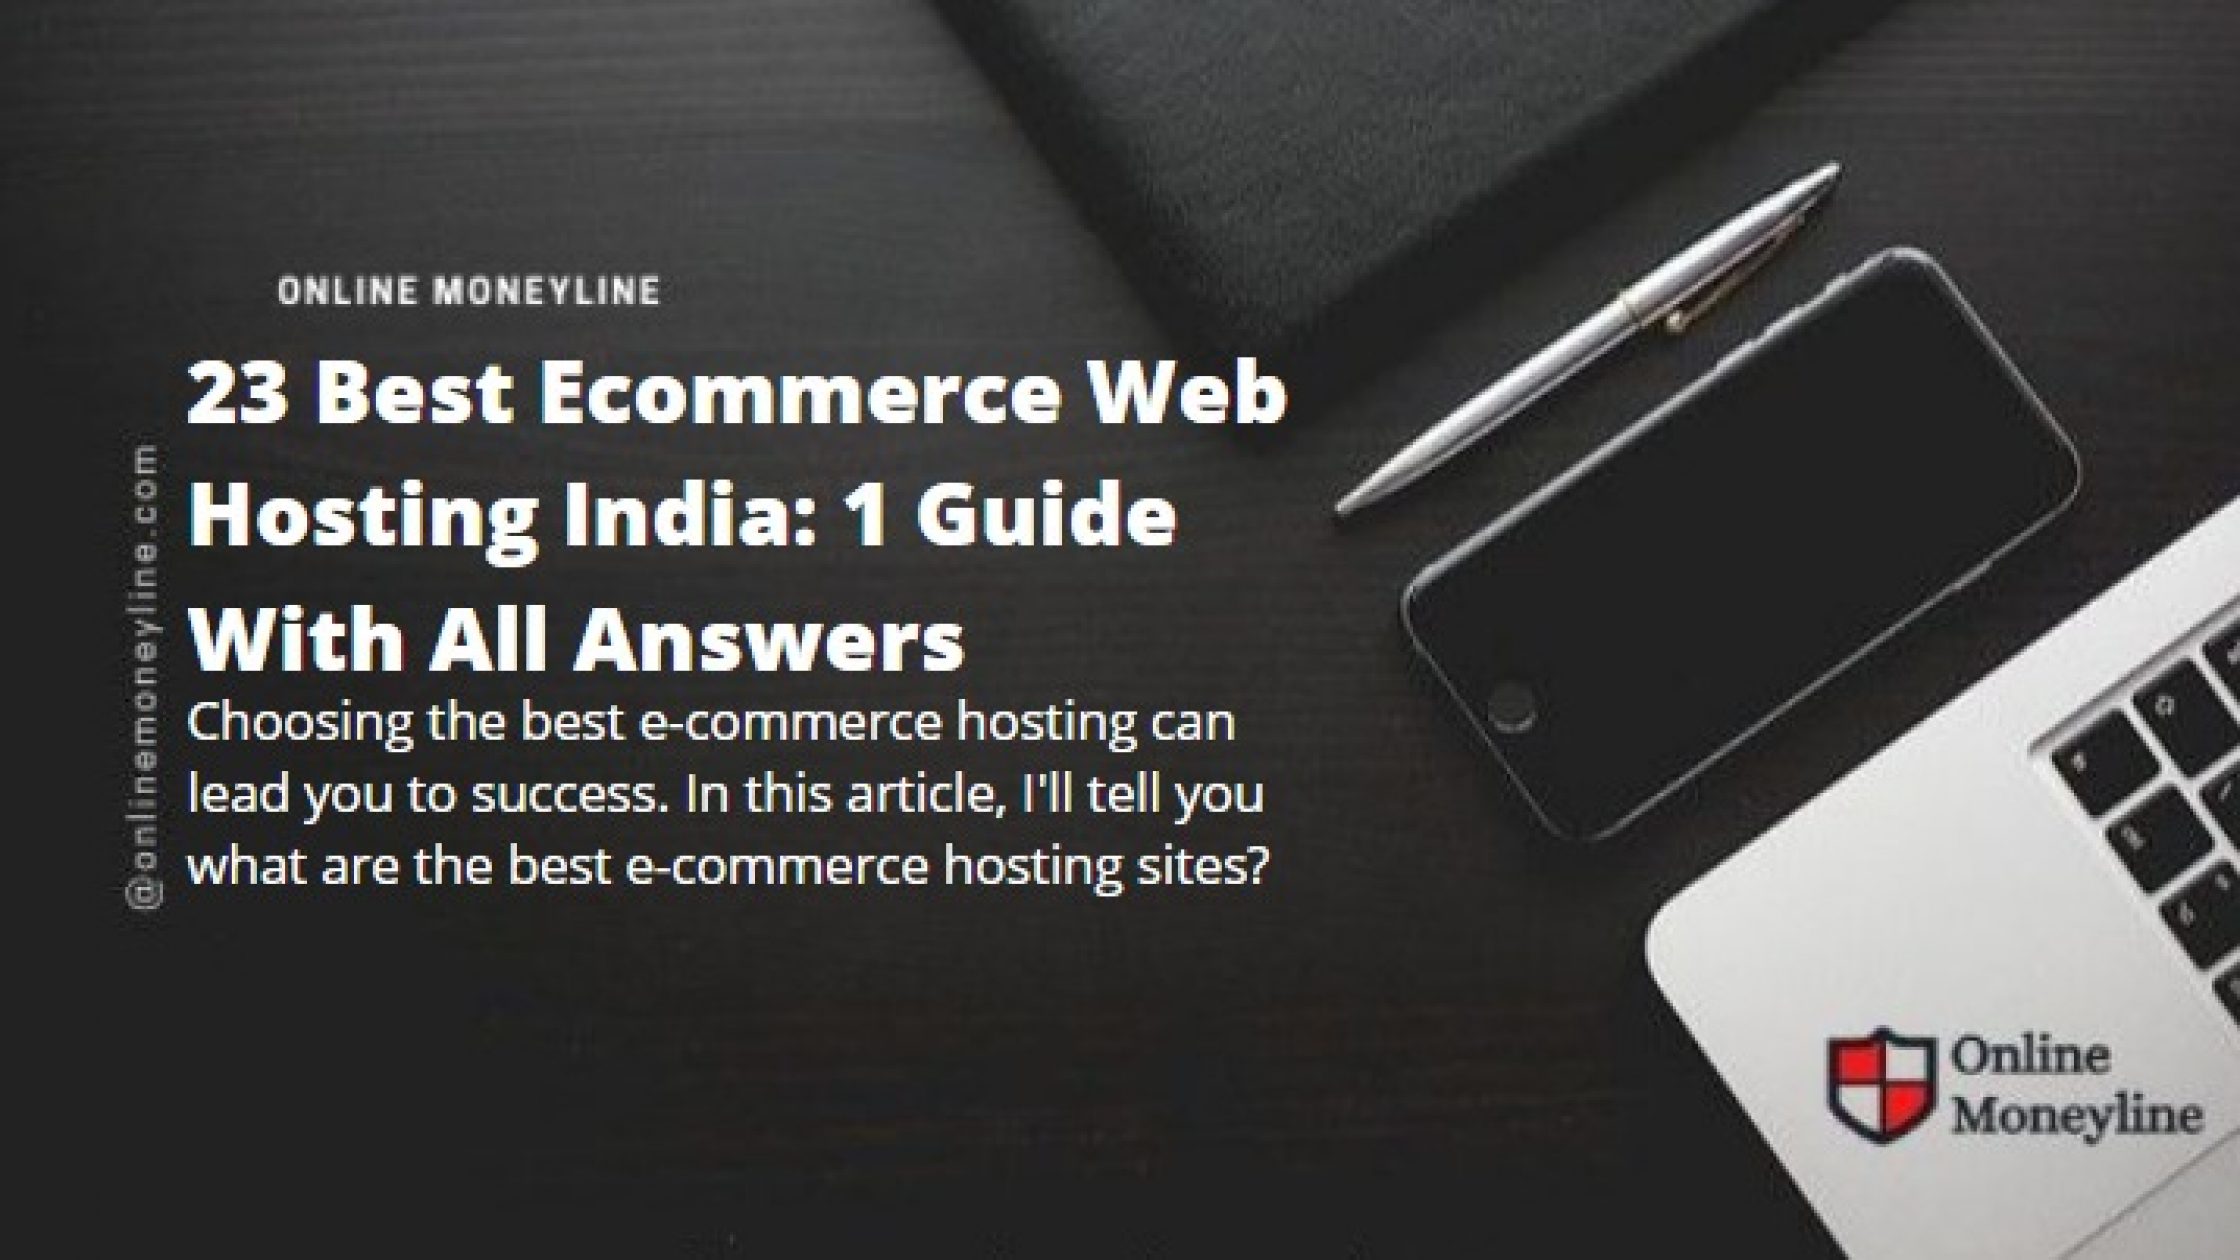 23 Best Ecommerce Web Hosting India: 1 Guide With All Answers